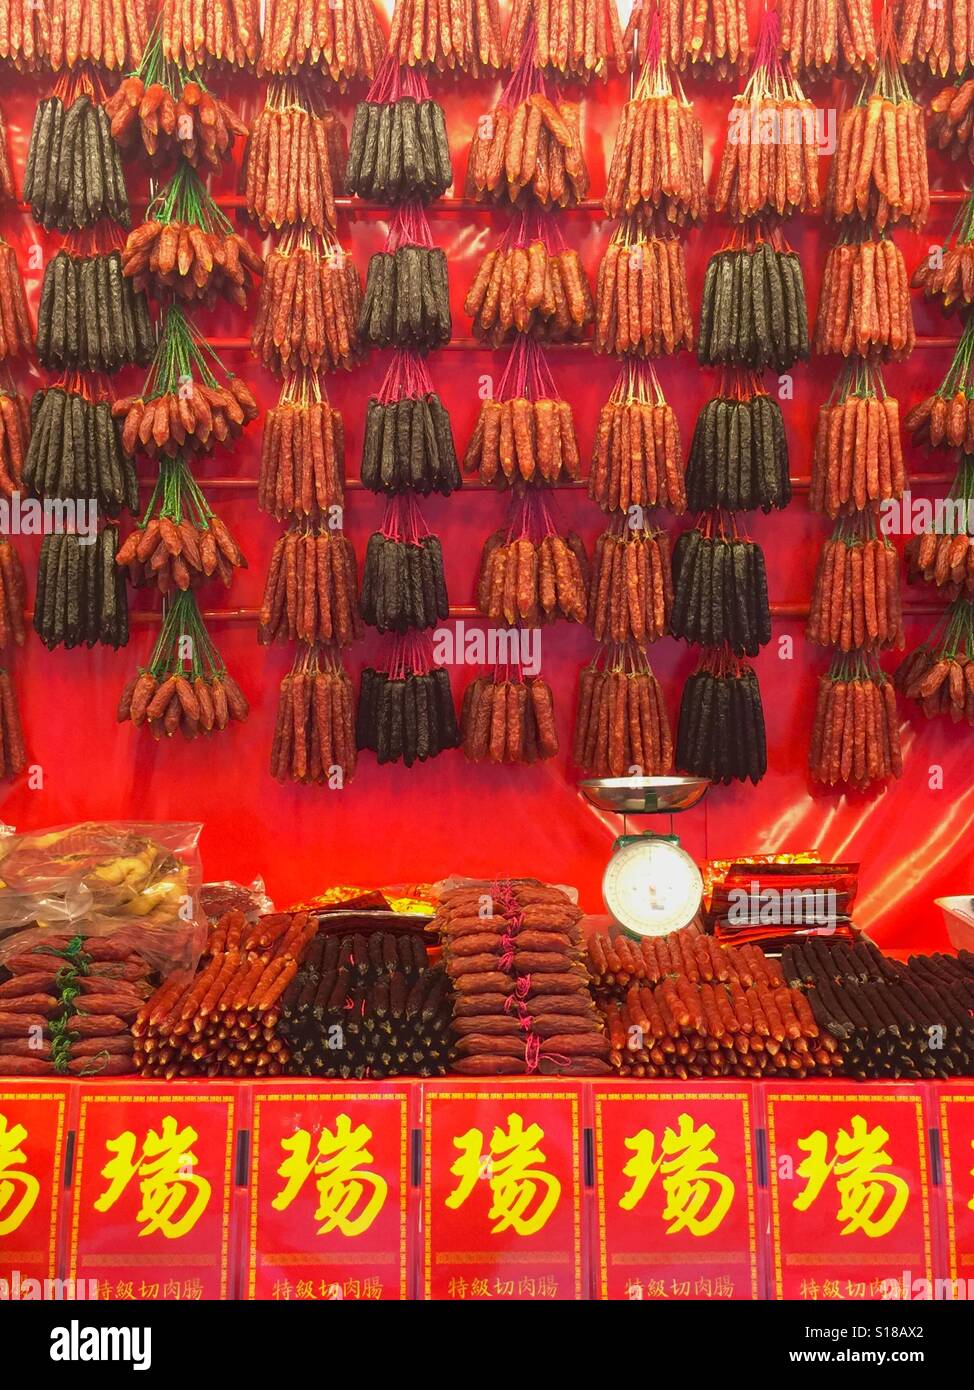 Chinese pork sausages for the Lunar New Year, Chinatown, Singapore Stock Photo